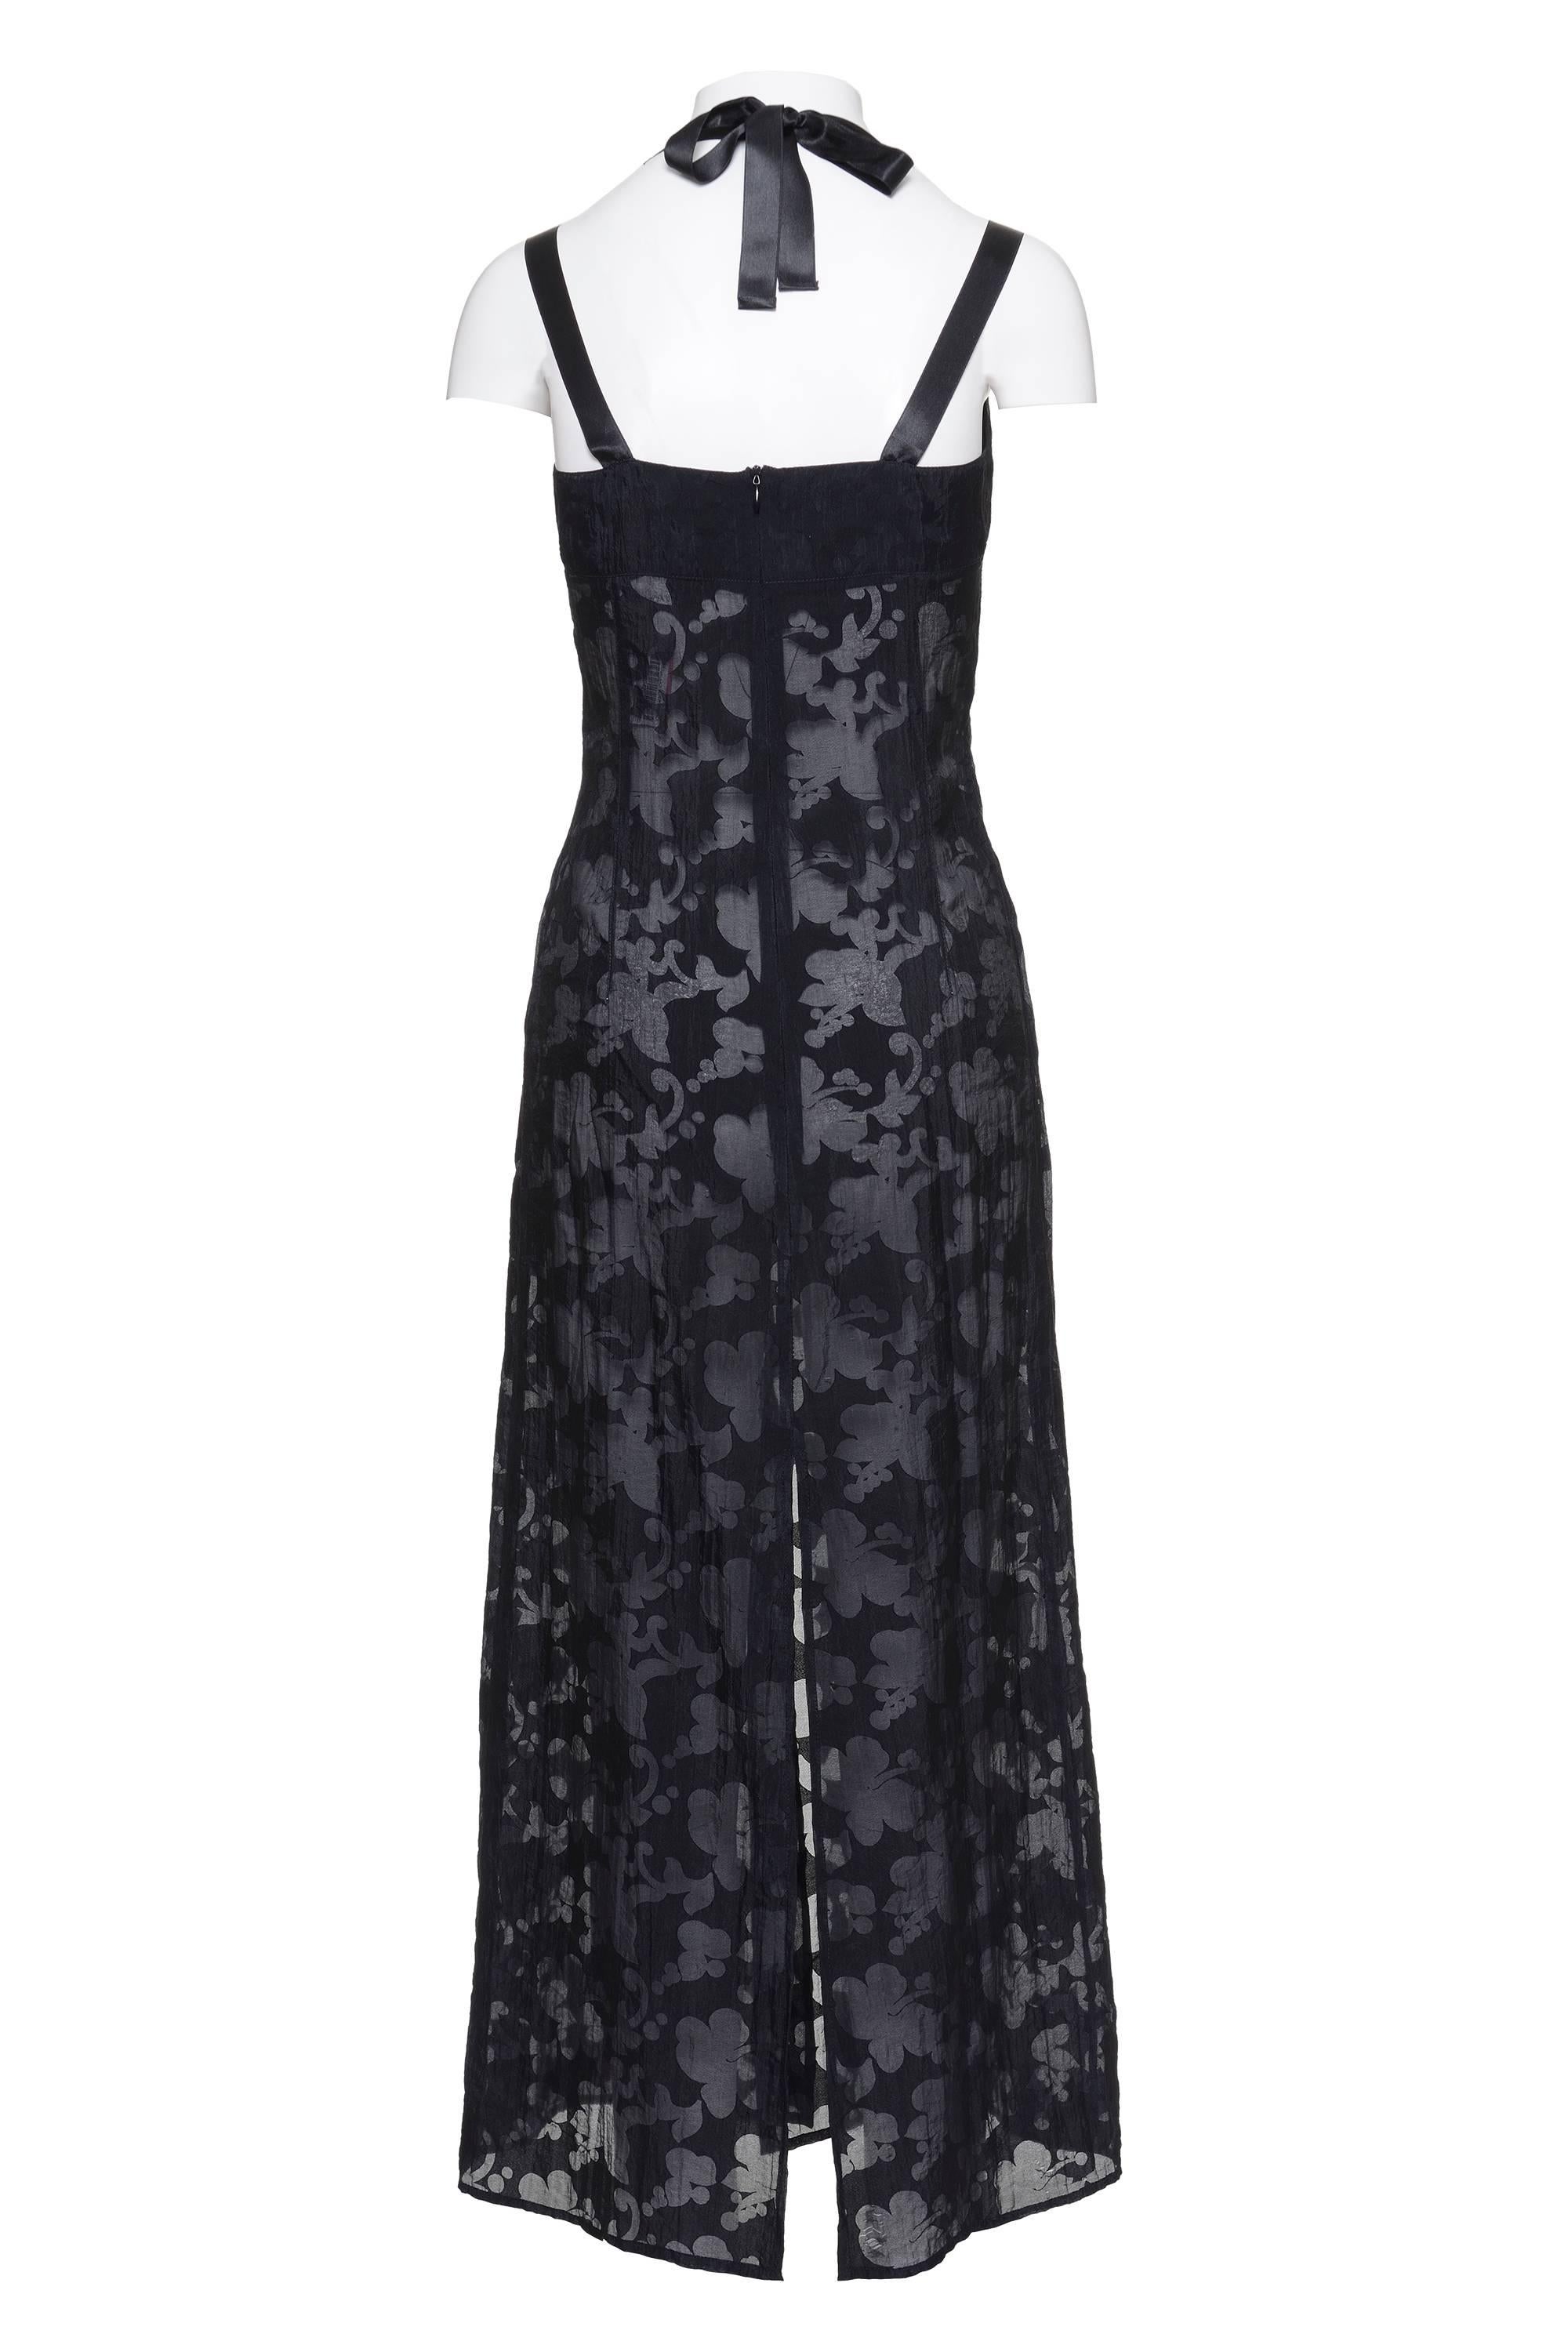 This lovely black sheer dress made of silk organza by JOHN RICHMOND has an adjustable lace to adapt on the shoulders, front and back vents, a horizontal decorative cut on the bust, and back invisible zip closure. The textile has been made with a